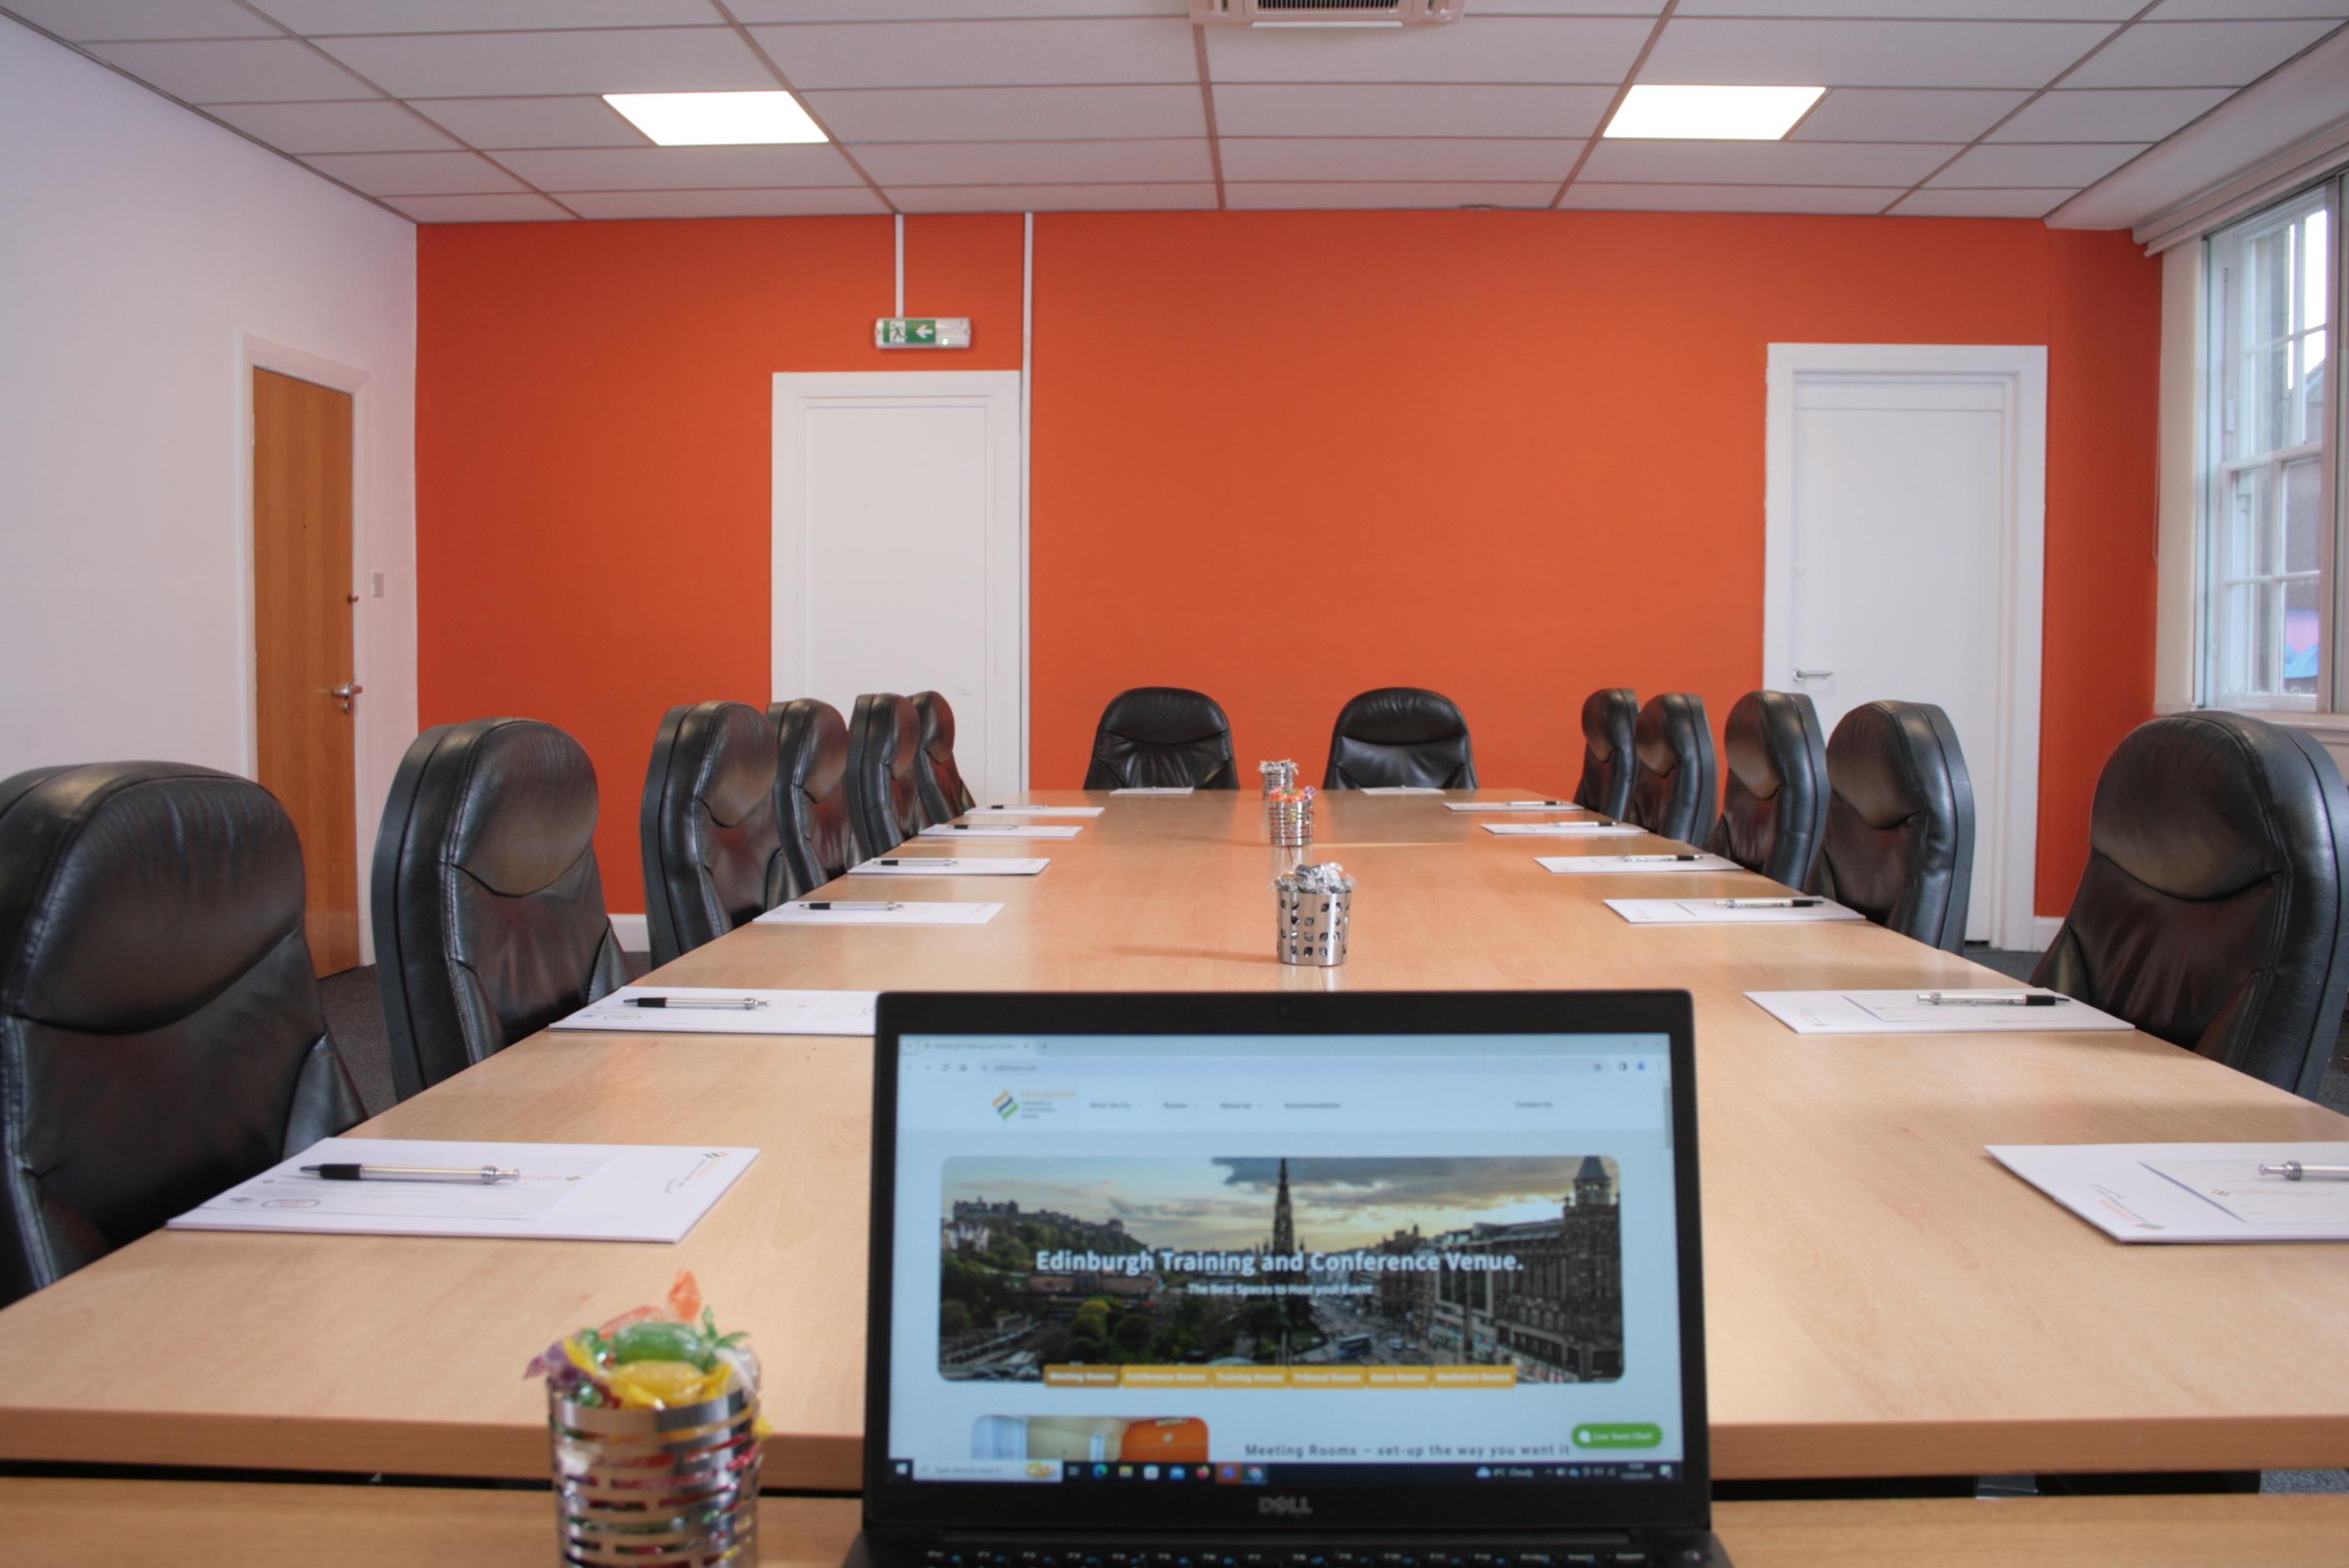 Flexible Meeting Rooms, Edinburgh Training And Conference Venue photo #2